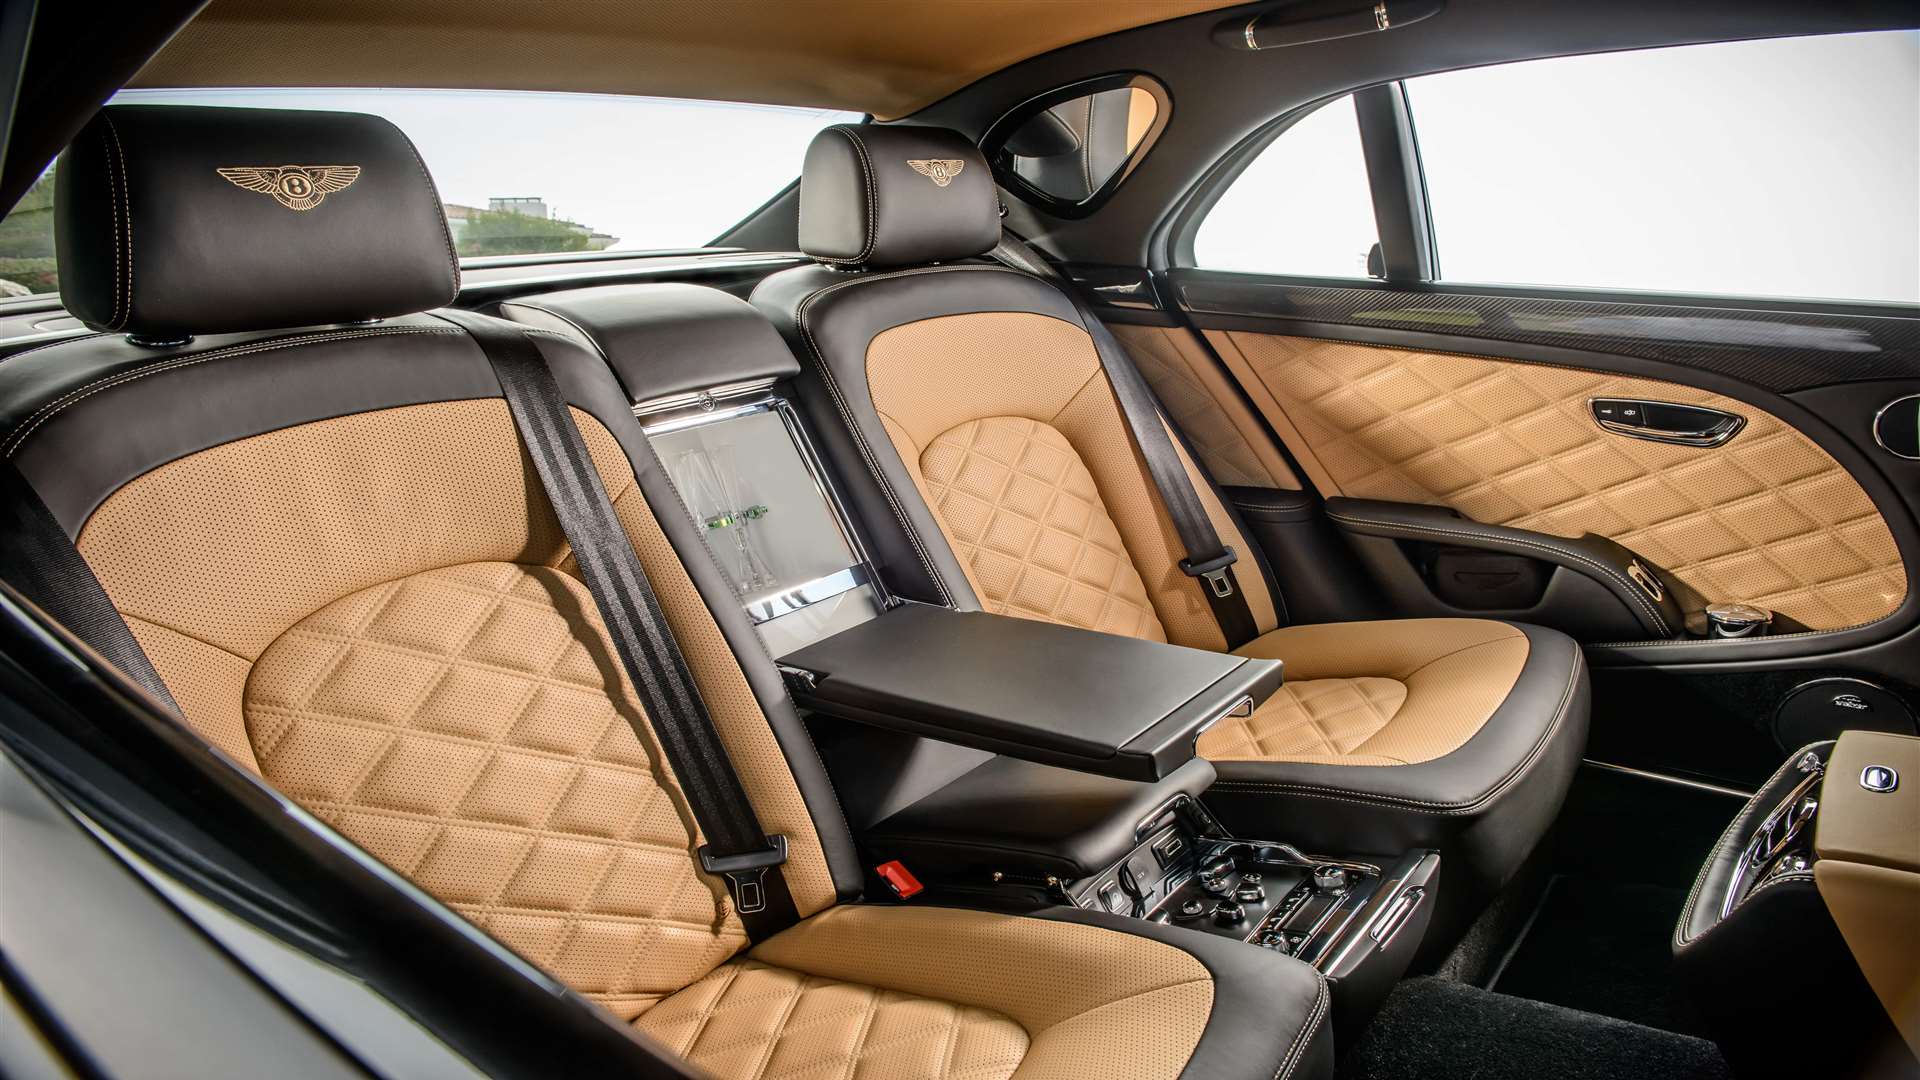 Luxurious, inviting and spacious, the rear seats are not a bad place to enjoy everything that the Mulsanne Speed has to offer